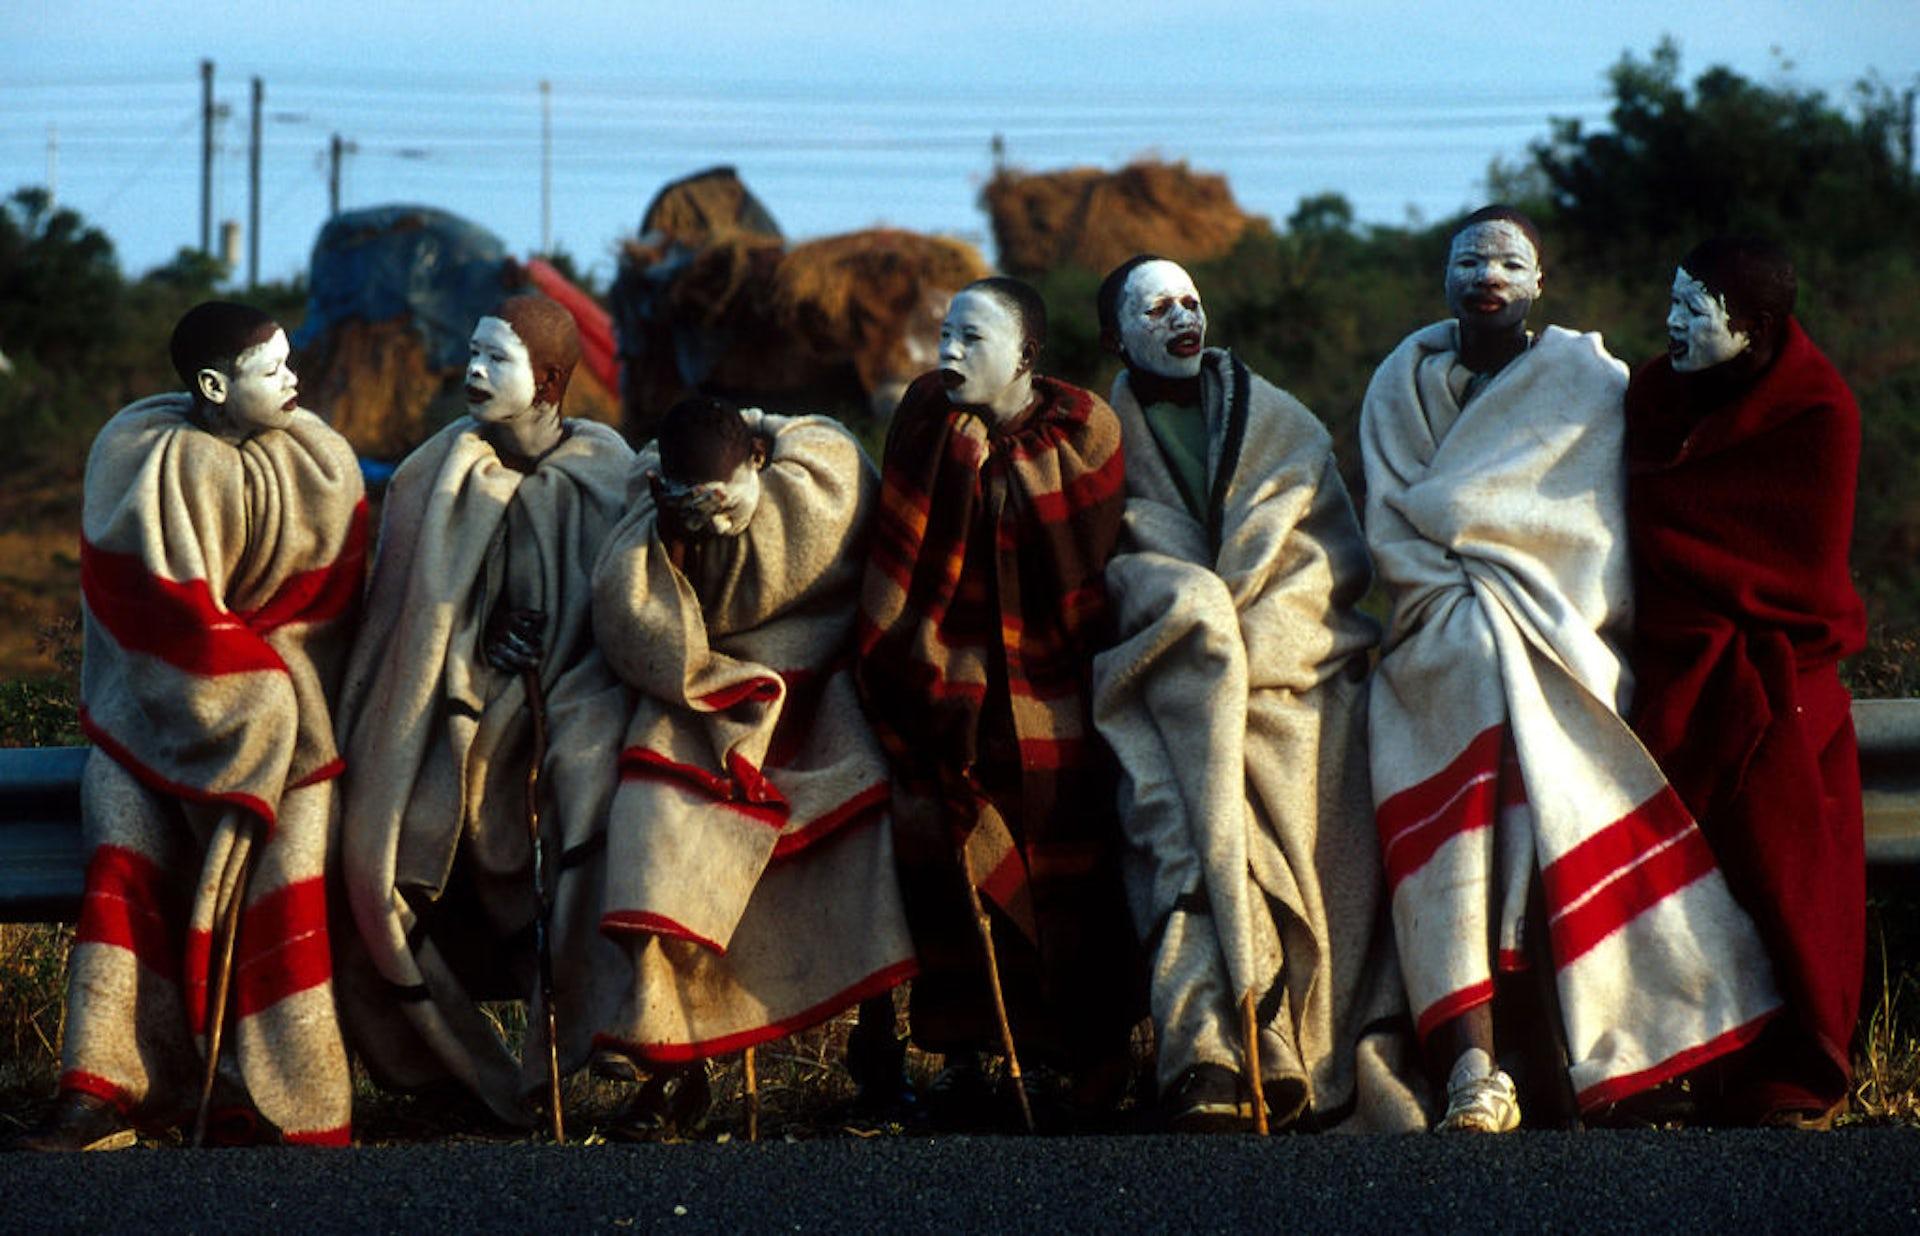 Seven boys in a row, draped in red and white blankets, their faces smeared with white clay and leaning on walking sticks.